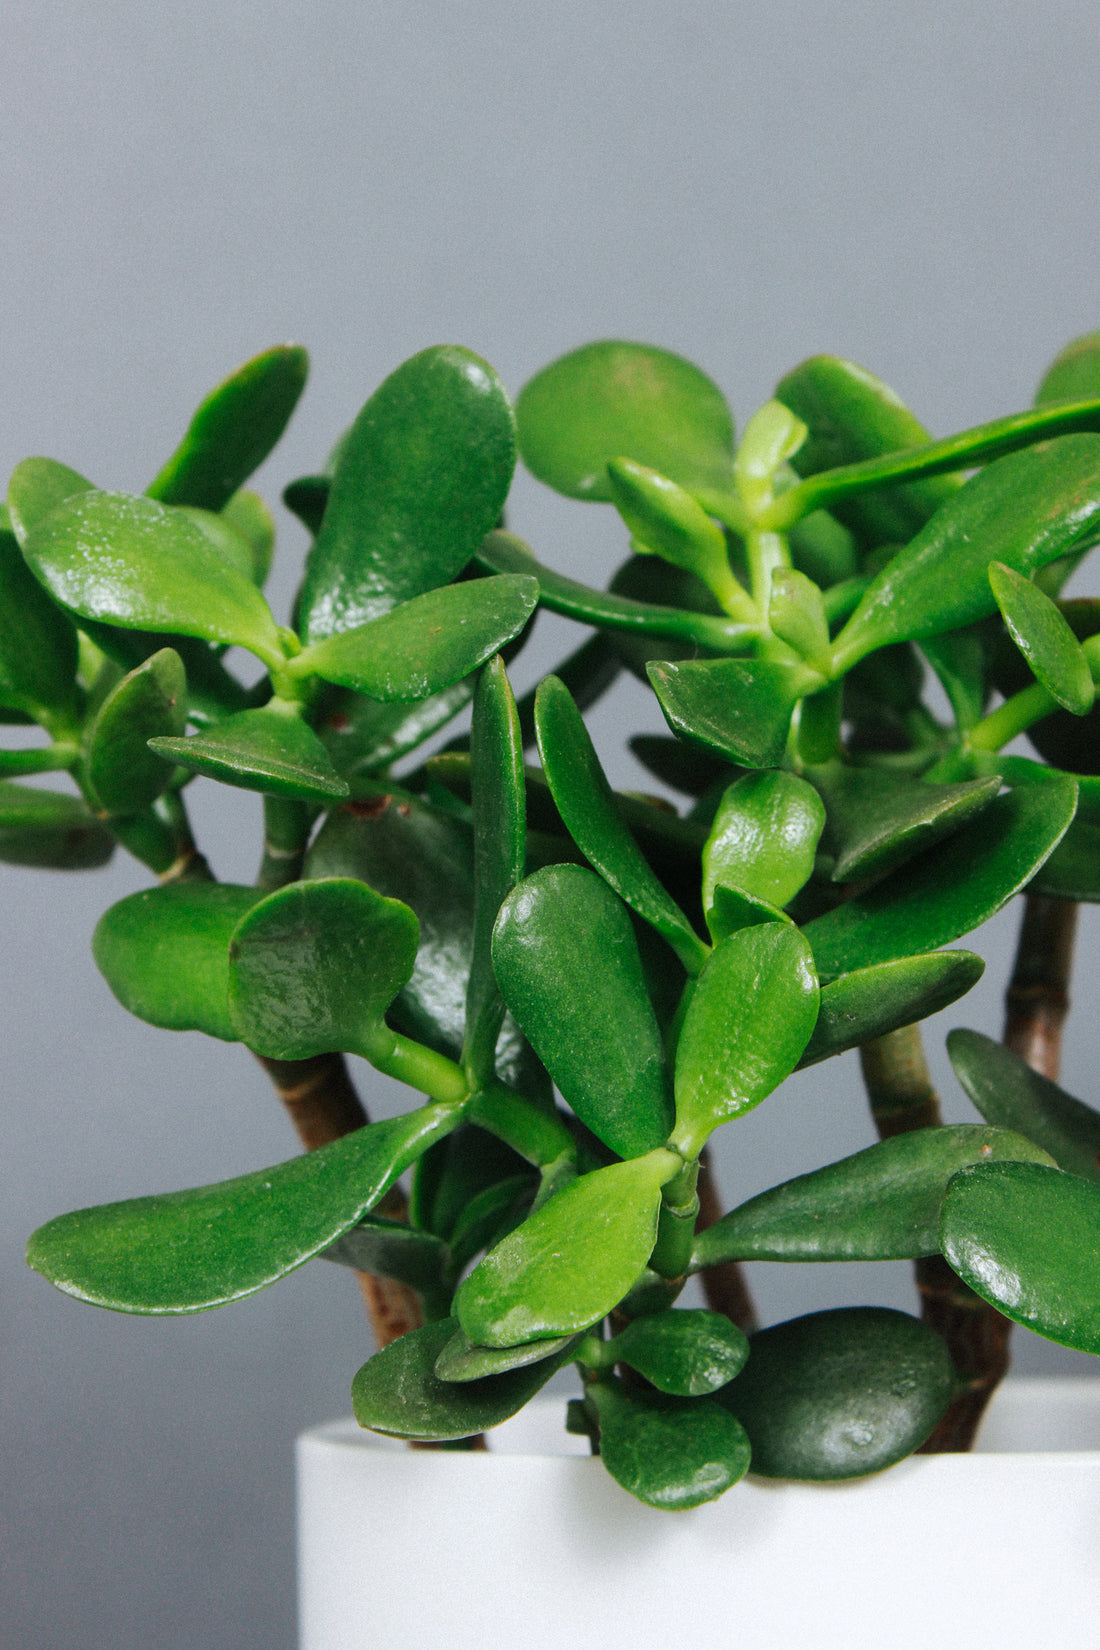 A close-up of the Jade Plants leaves.